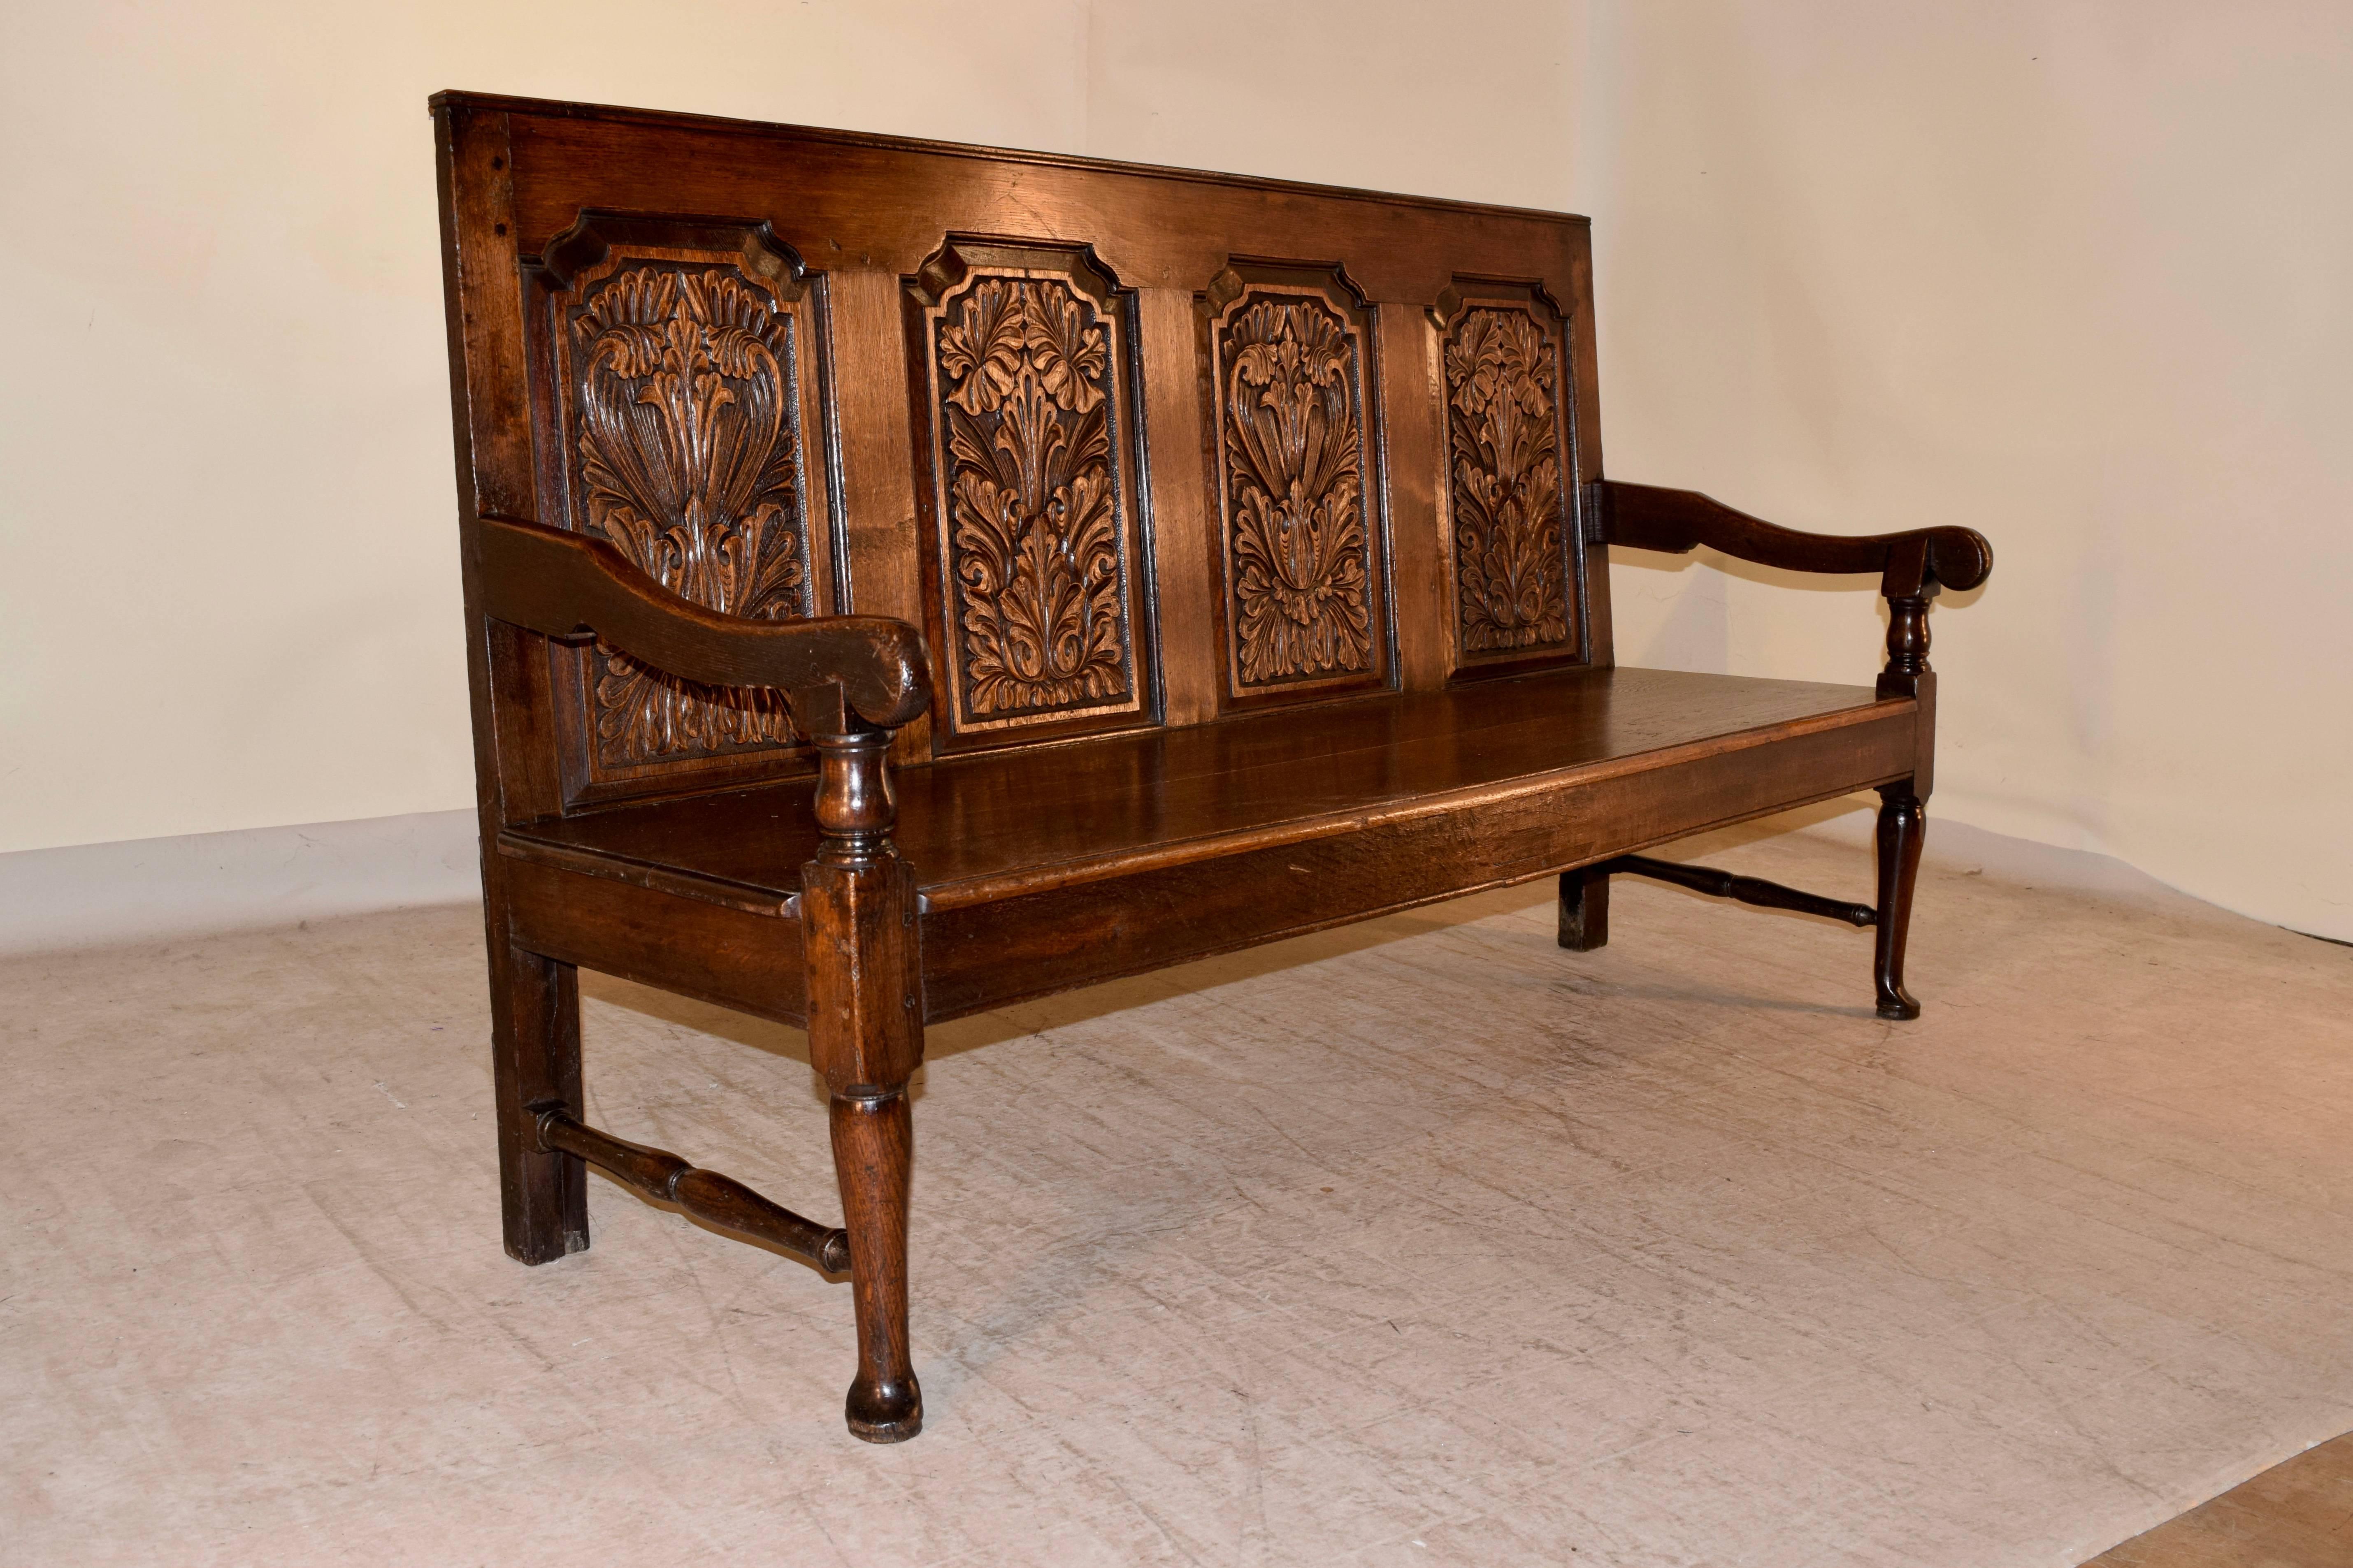 18th century English oak bench with a paneled back, which has four hand-carved shaped molded raised panels with acanthus leaf decoration. The seat is made up of two planks, and is beveled along the front edge. The arms are also shaped and the piece